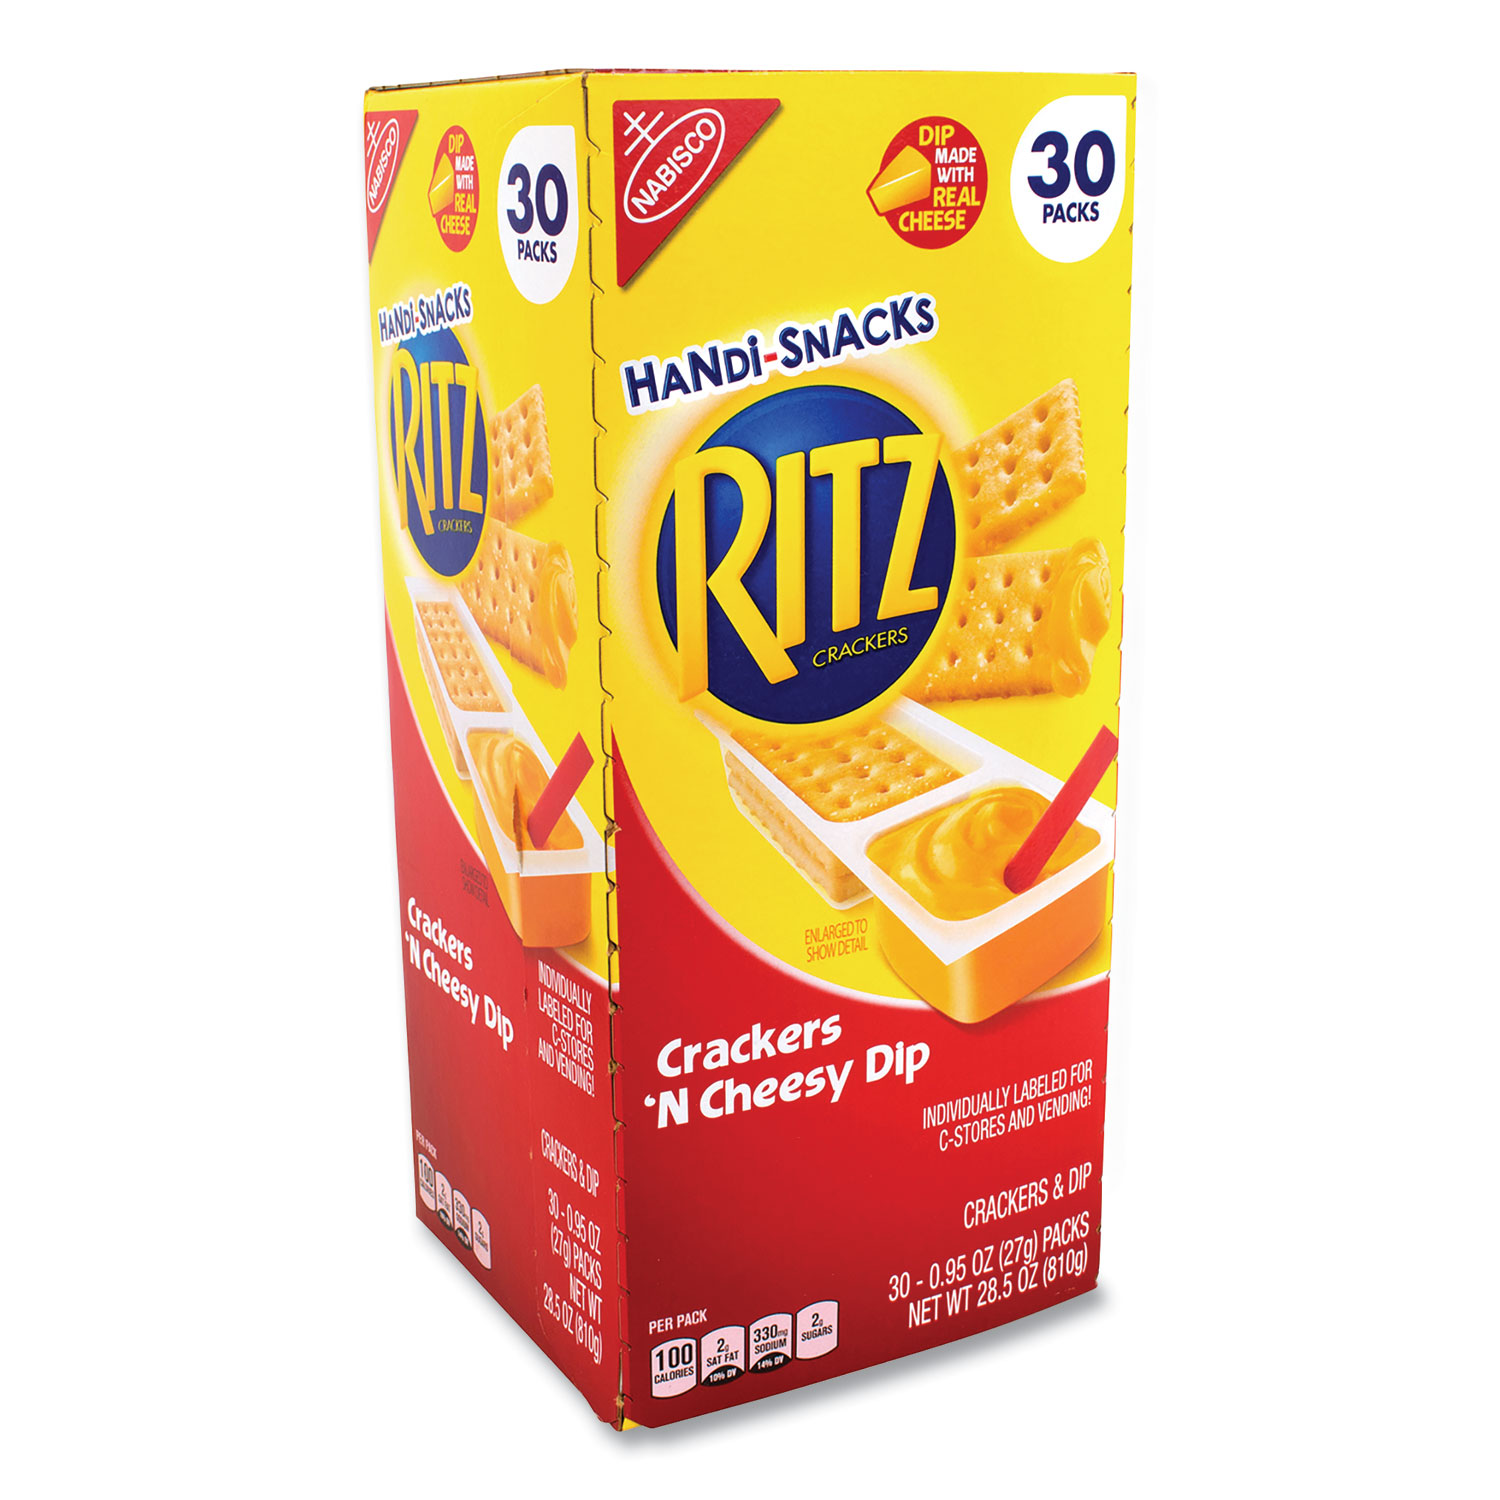  Nabisco 3811 Handi Snacks Ritz Crackers 'N Cheesy Dip, 0.95 oz Pack, 30 Packs/Box, Free Delivery in 1-4 Business Days (GRR22000534) 